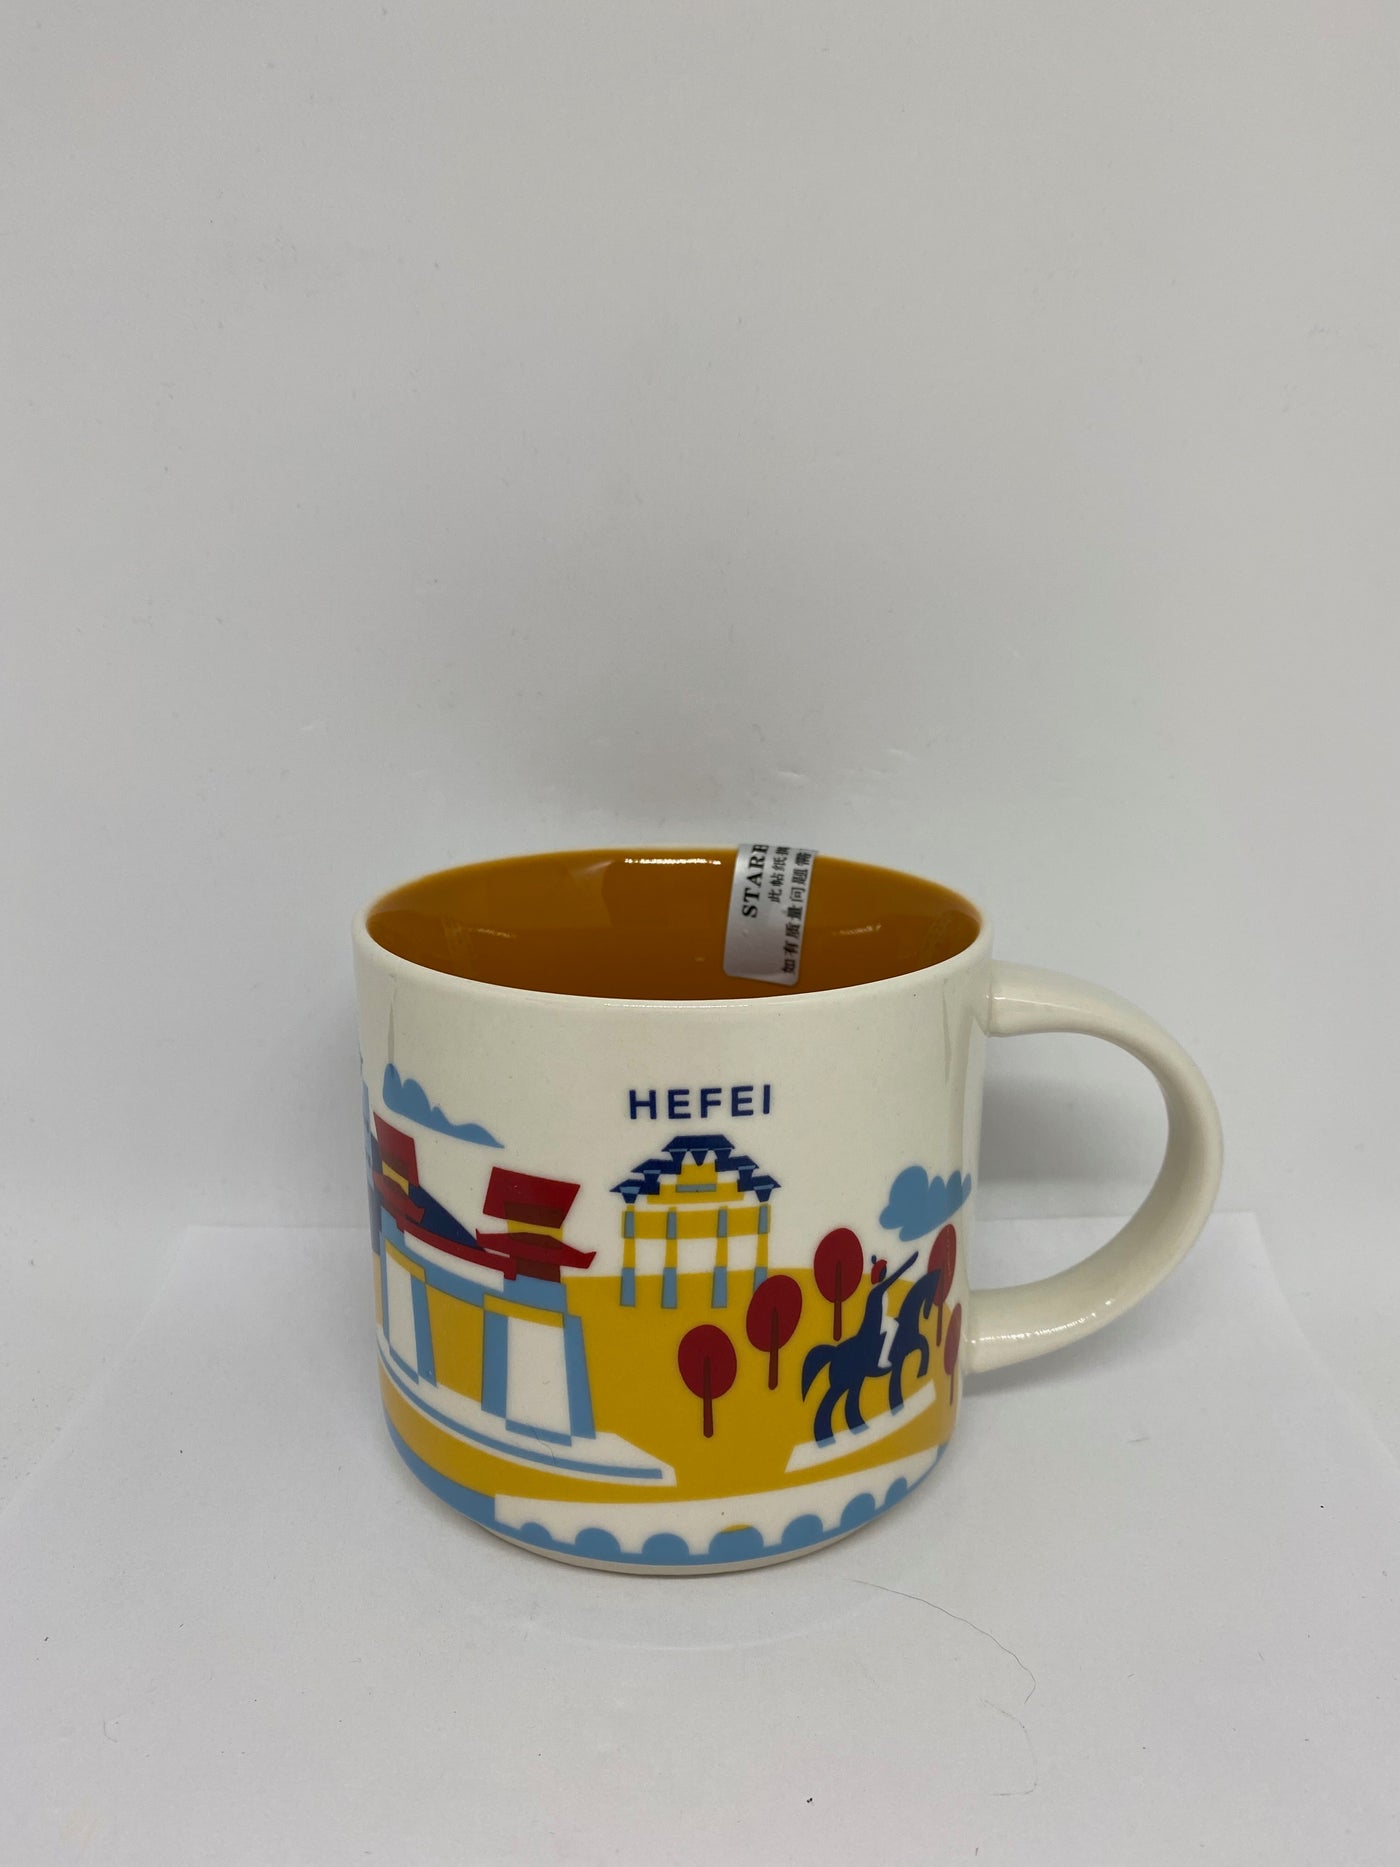 Starbucks You Are Here Collection Hefei China Ceramic Coffee Mug New With Box